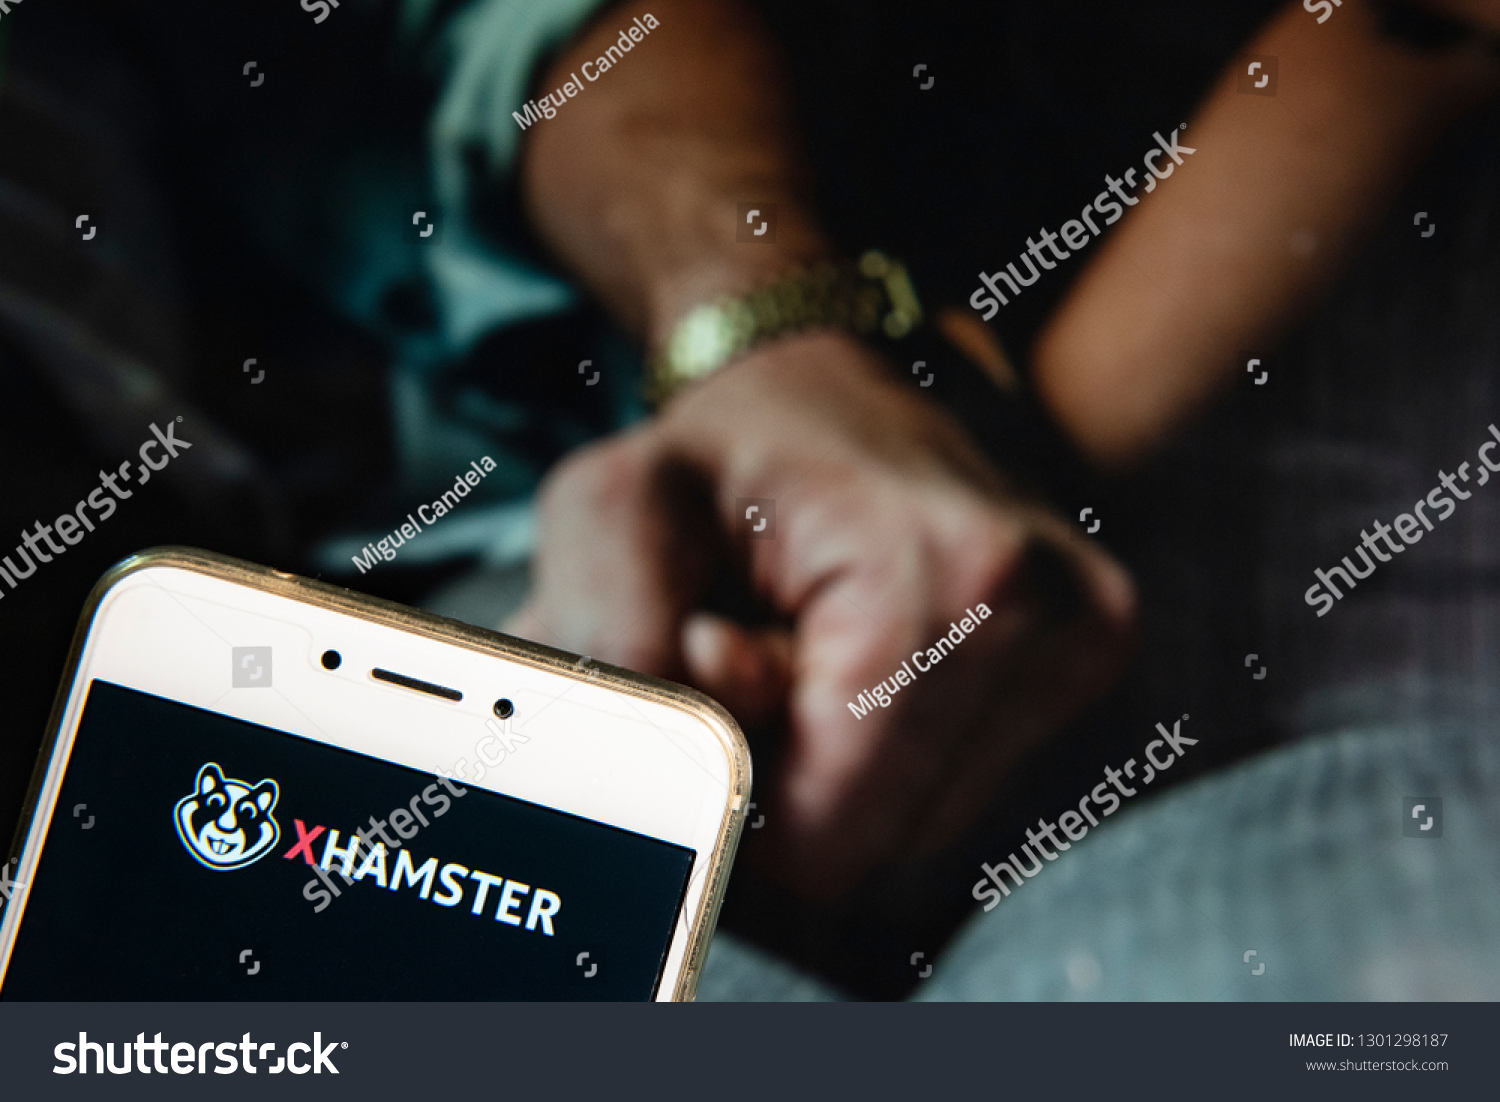 What Is X Hamster